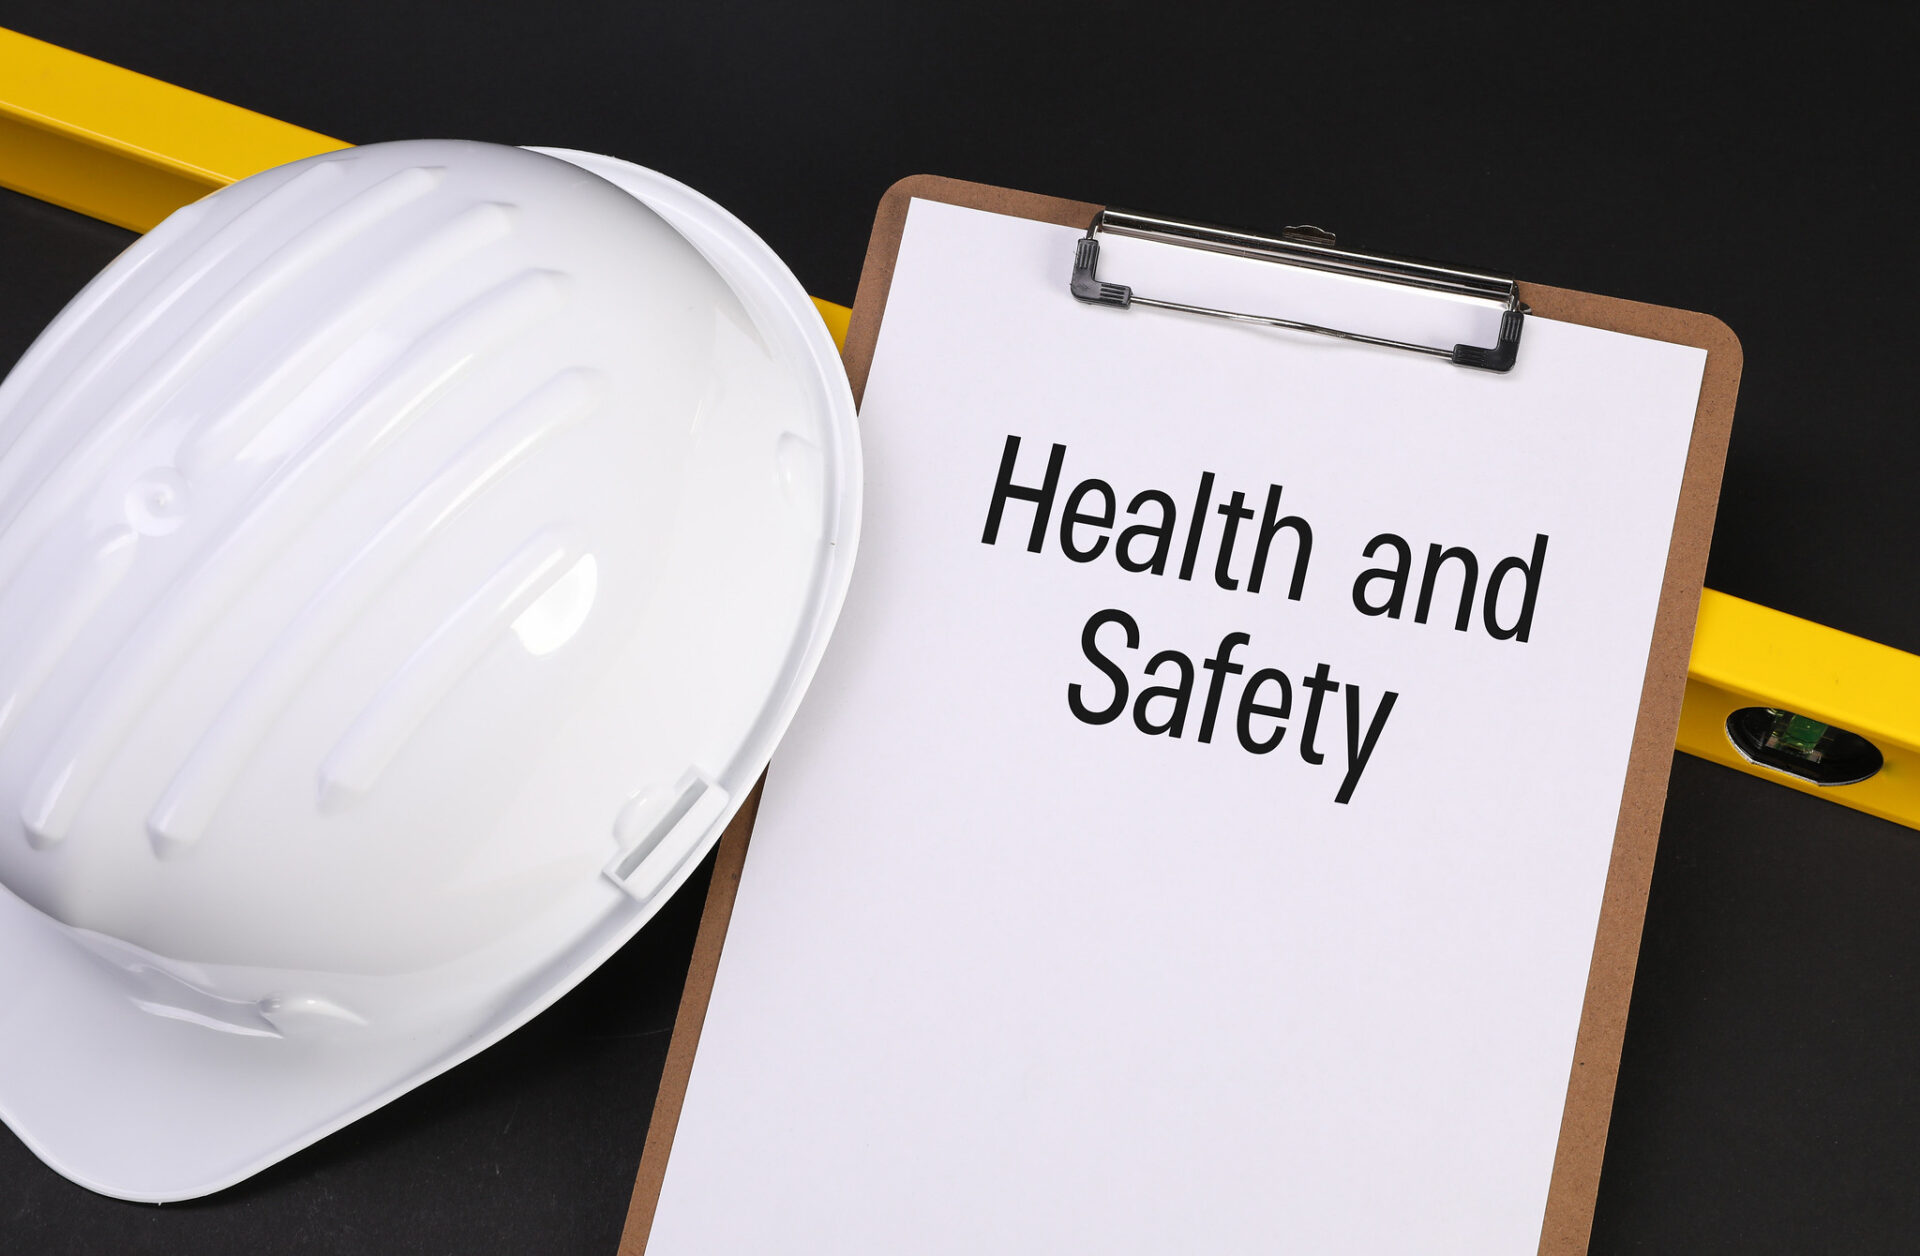 Health and Safety – What’s the Point